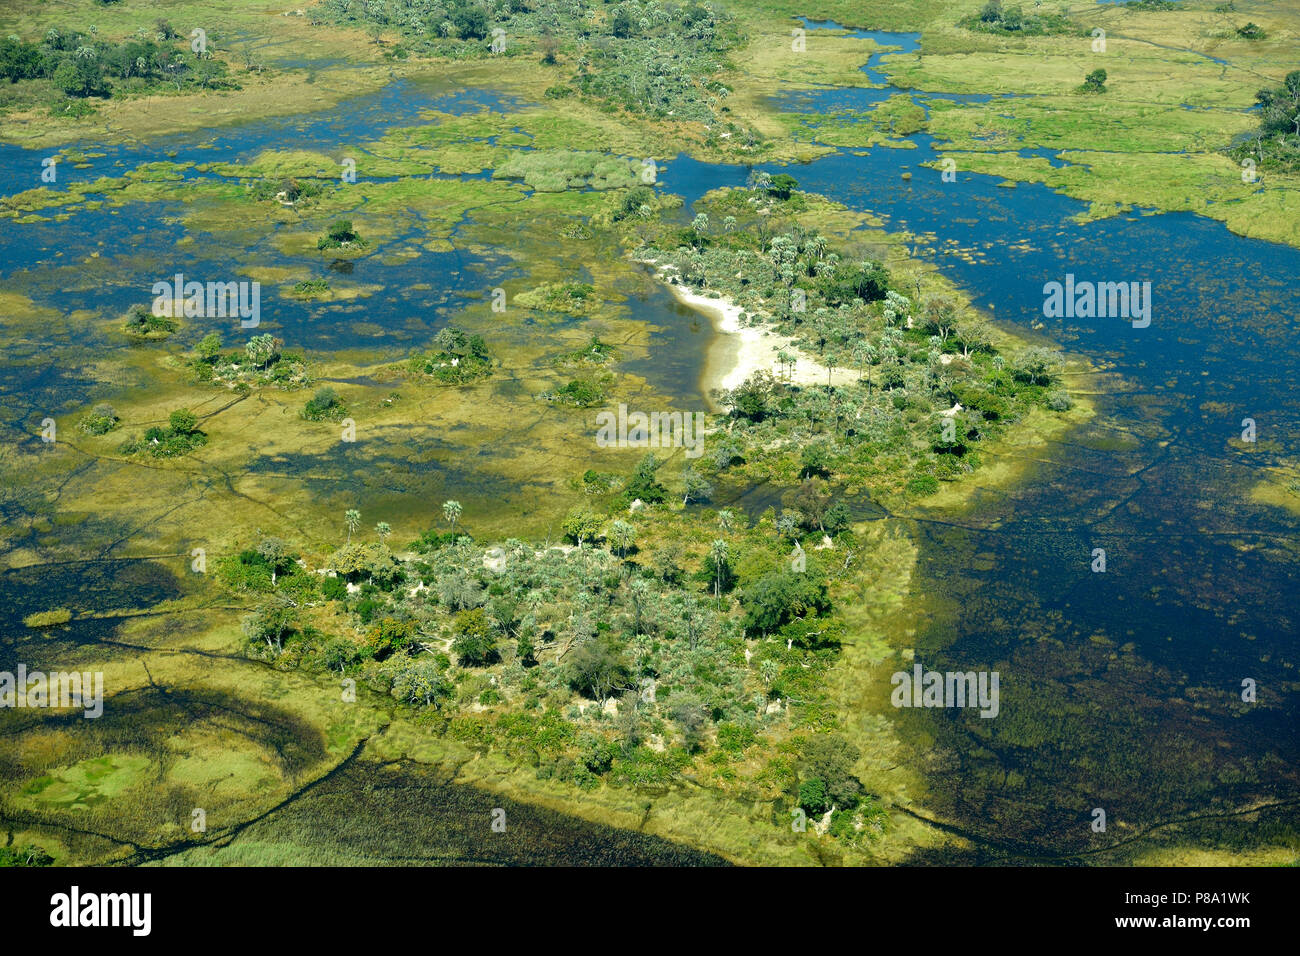 Wetlands, freshwater marshland with canals and islands, aerial view, Okavango Delta, Moremi Game Reserve, Botswana Stock Photo